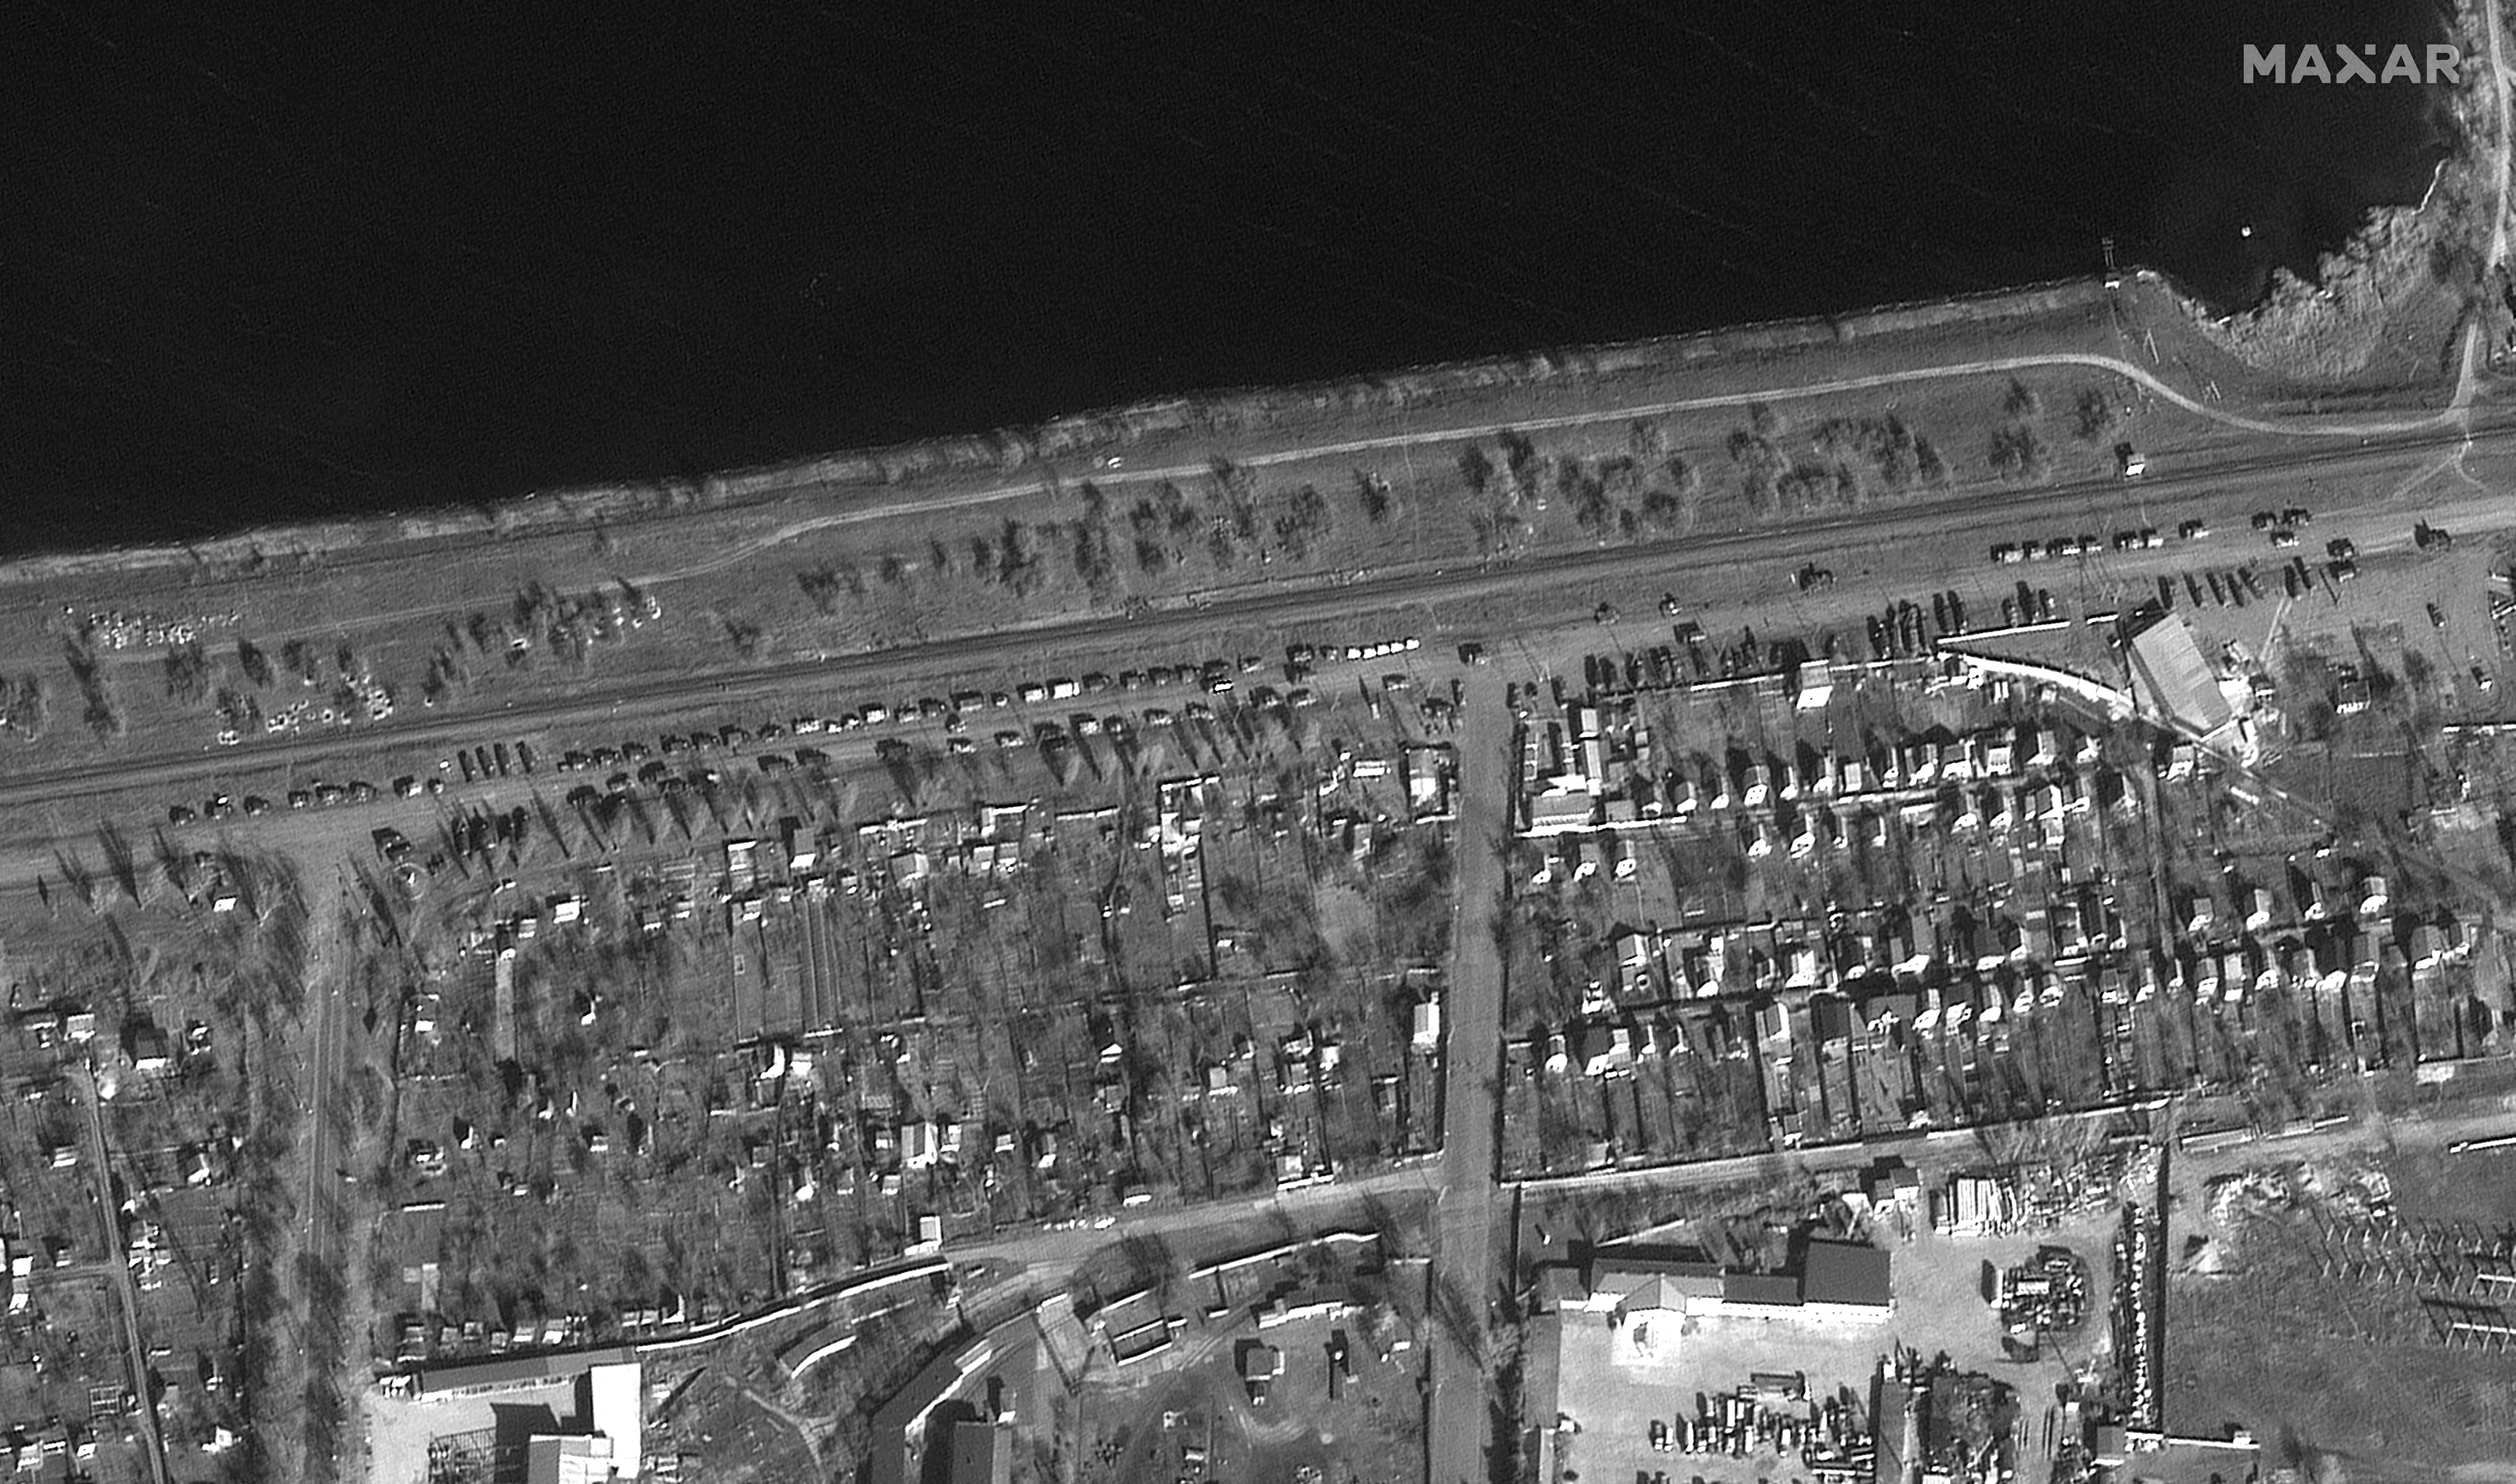 Satellite imagery shows Russian ground forces approaching Nova Kakhovka